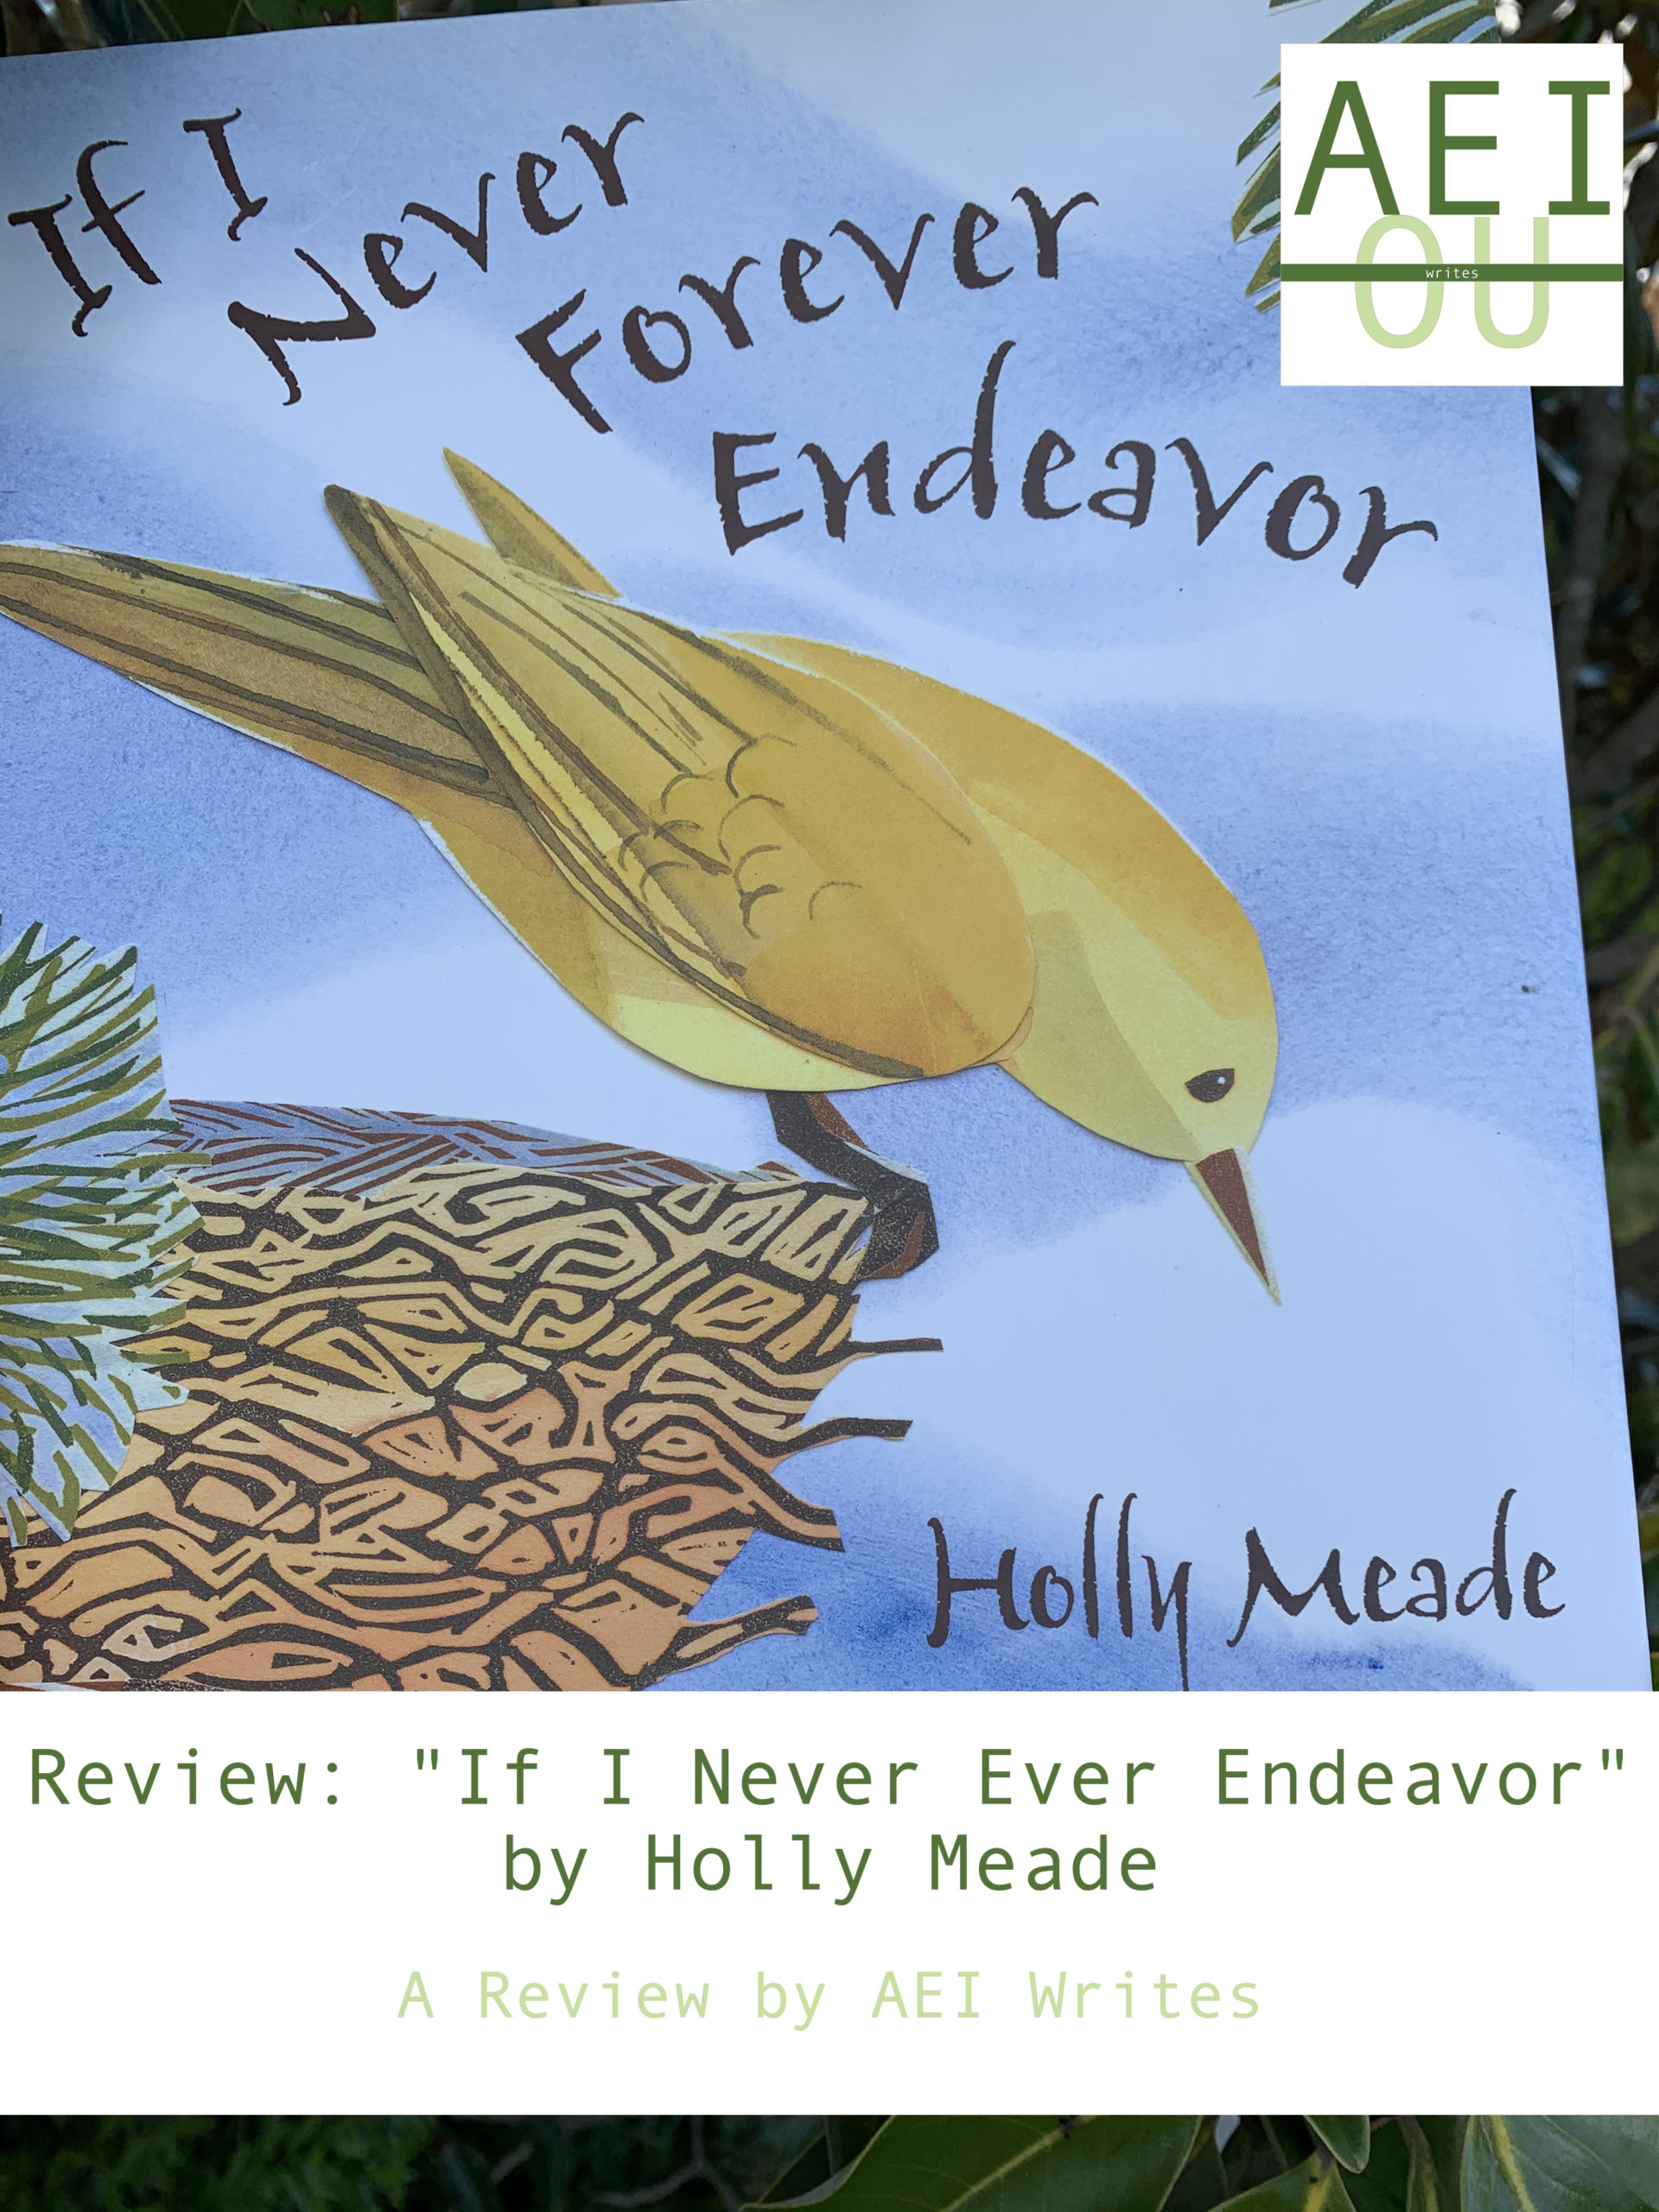 Review: “If I Never Ever Endeavor” by Holly Meade